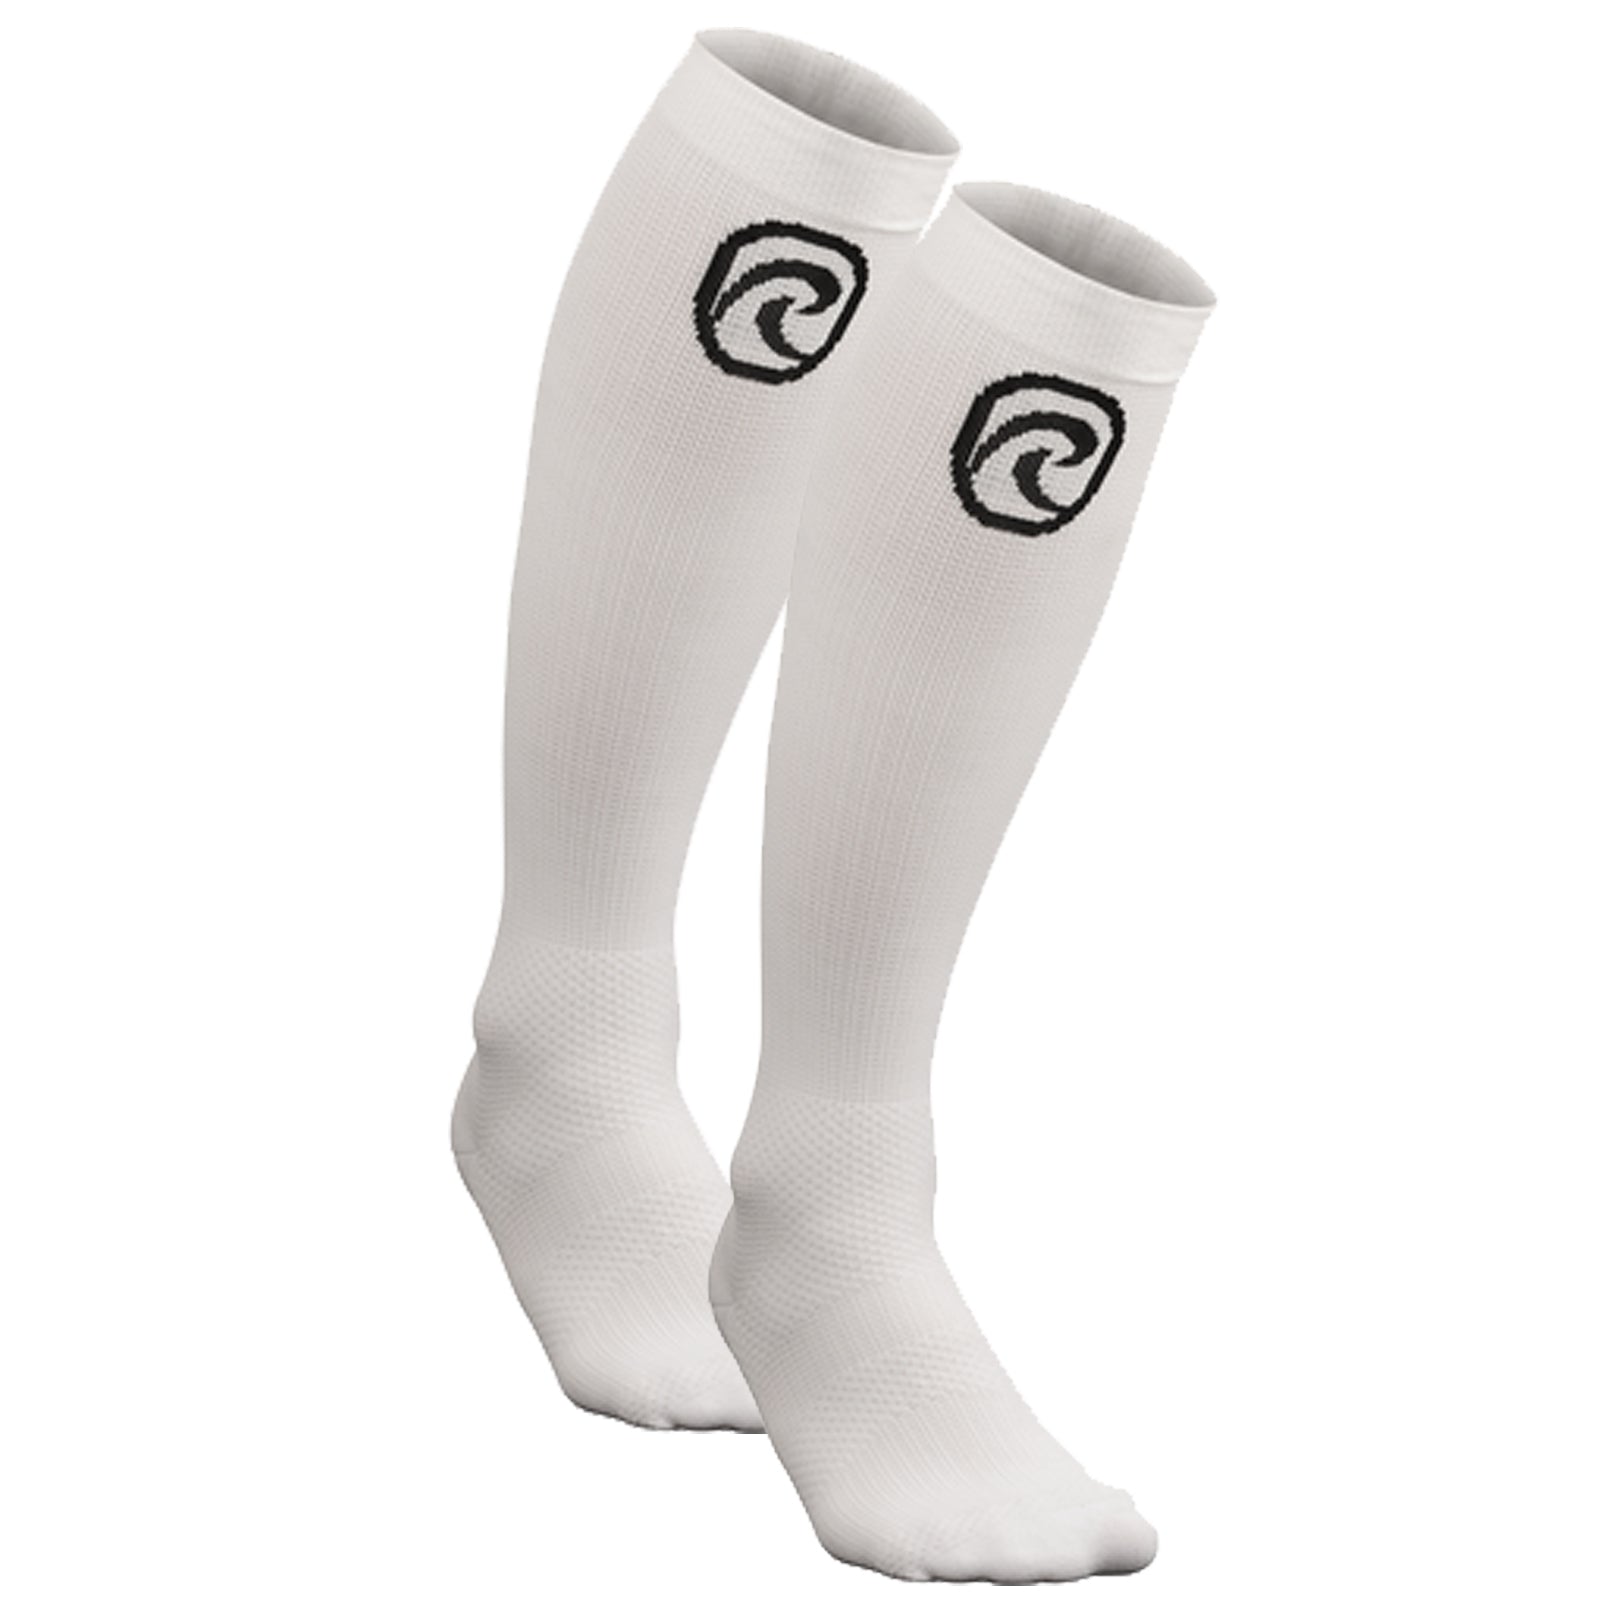 two white compression socks for running with black rehband logo